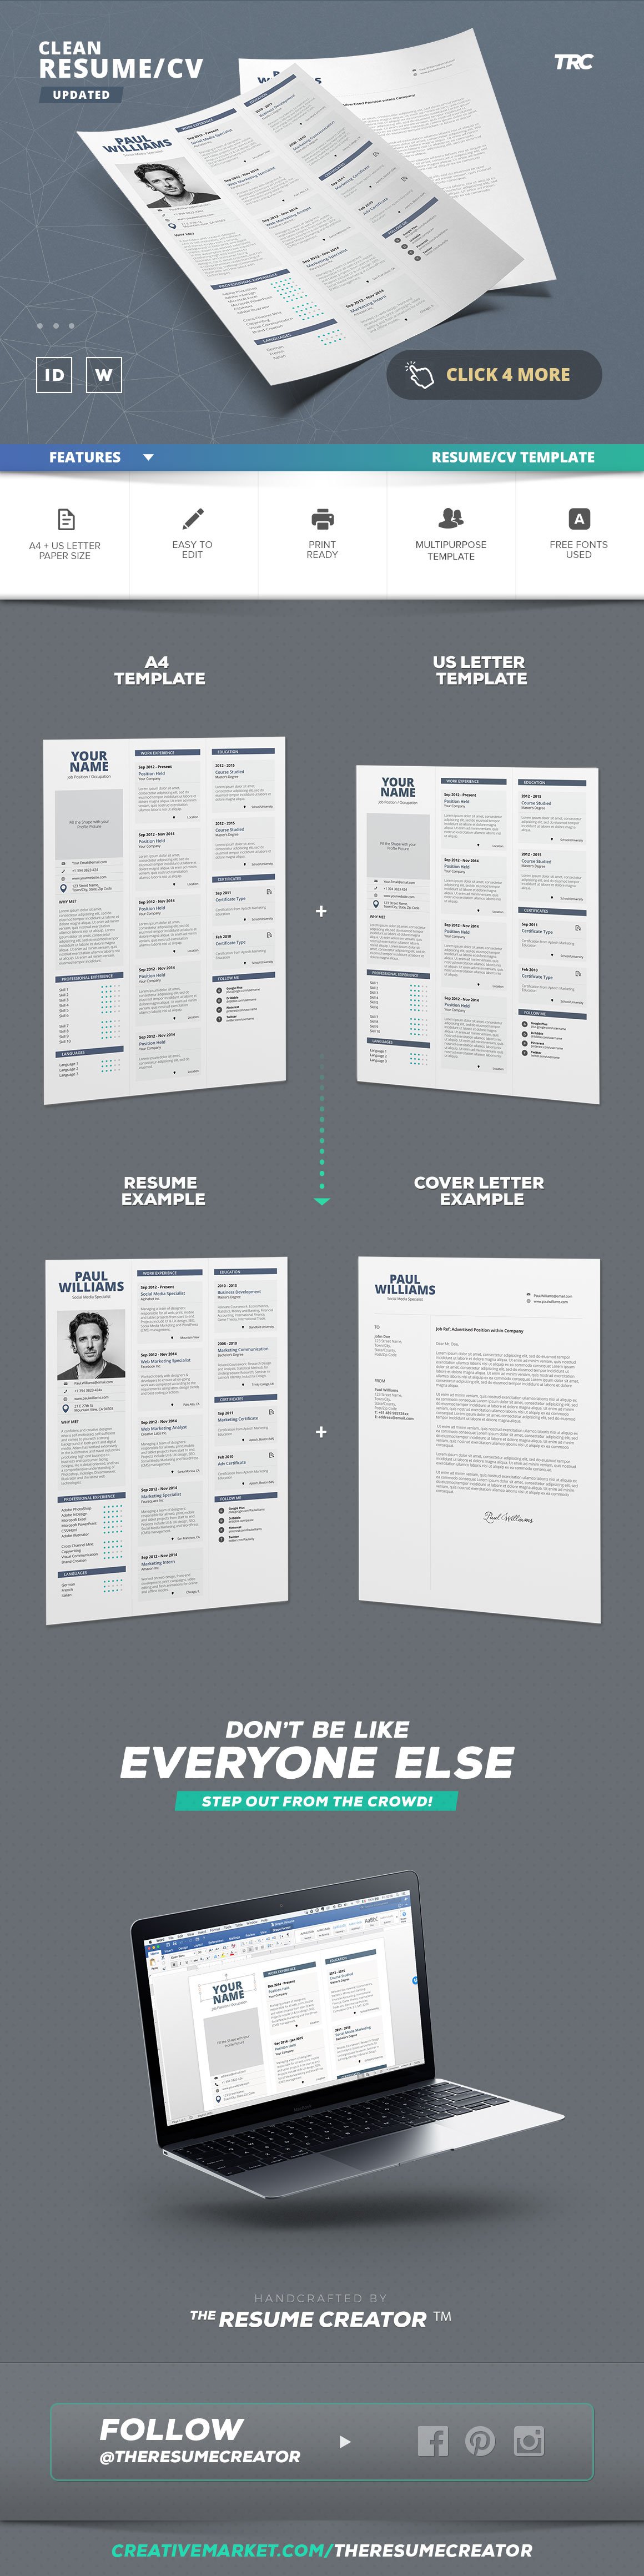 Clean Resume/Cv Template Volume 3 preview image.